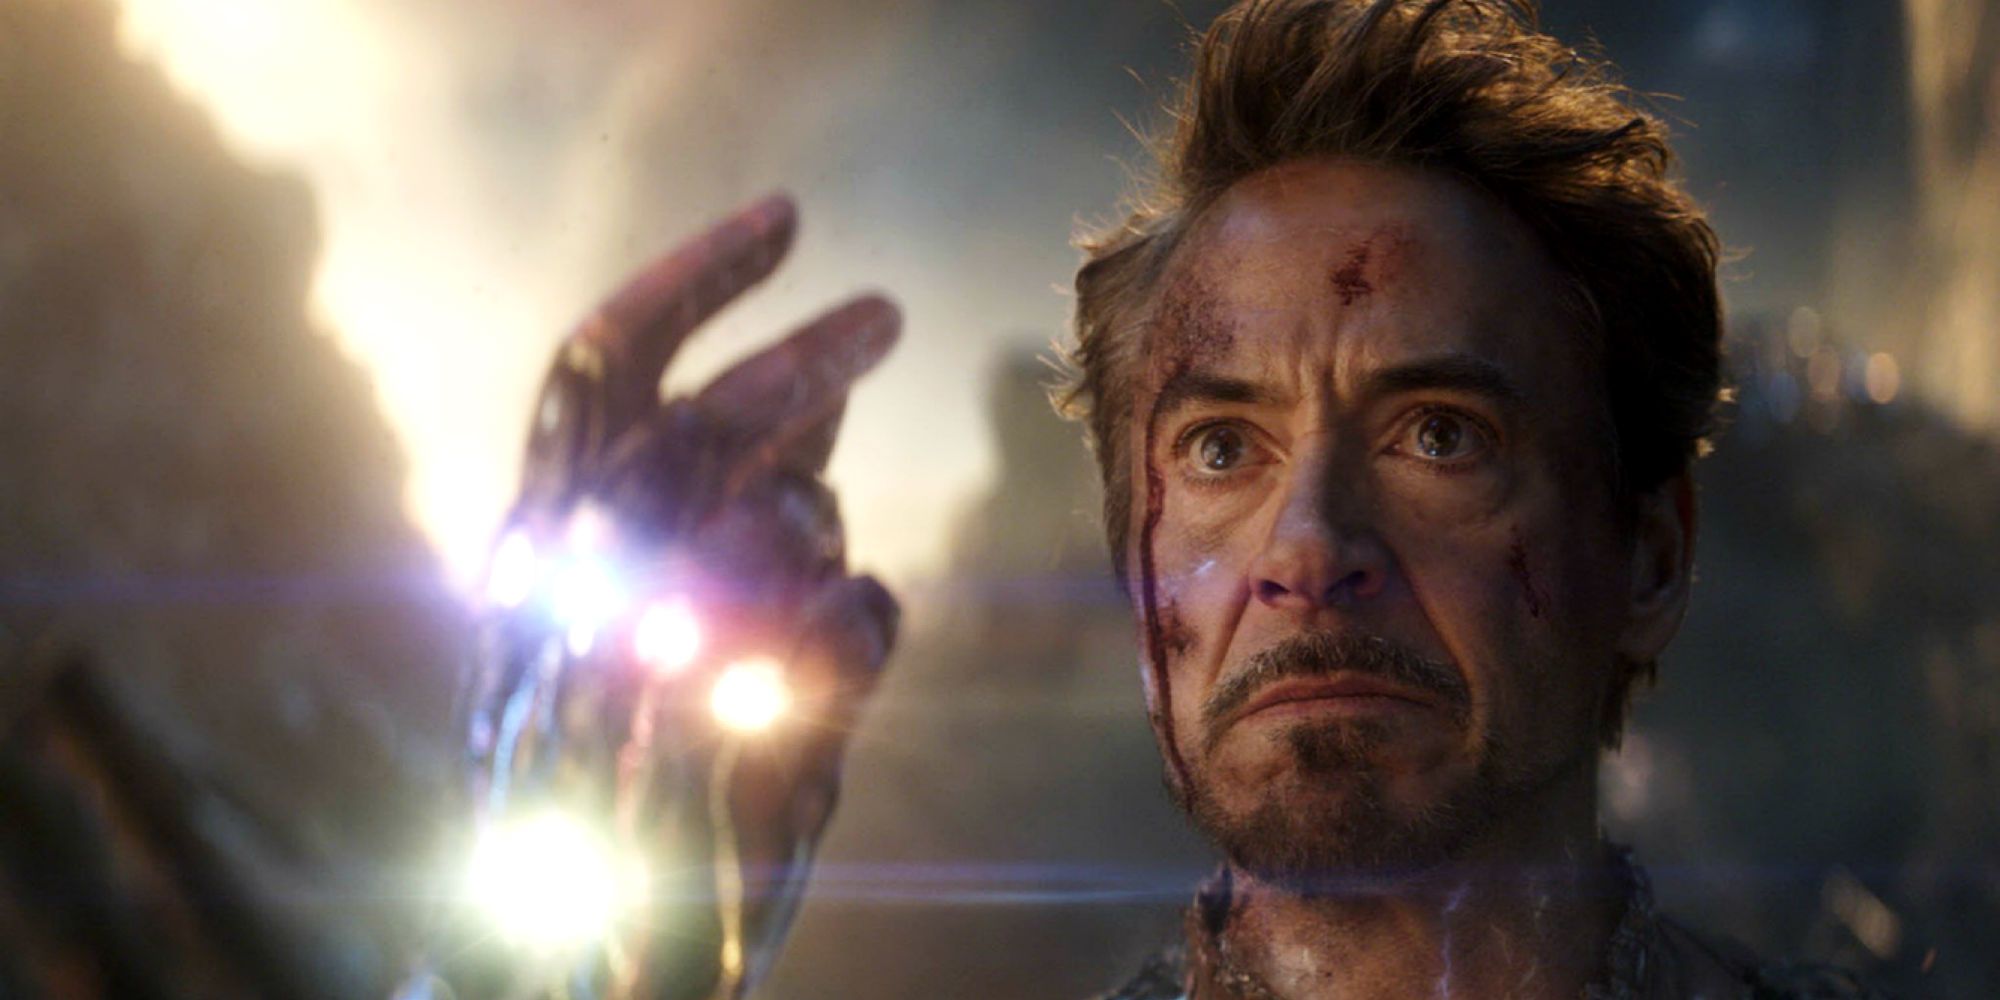 Robert Downey Jr Didn’t Want To Film Iconic Iron Man Endgame Scene Initially